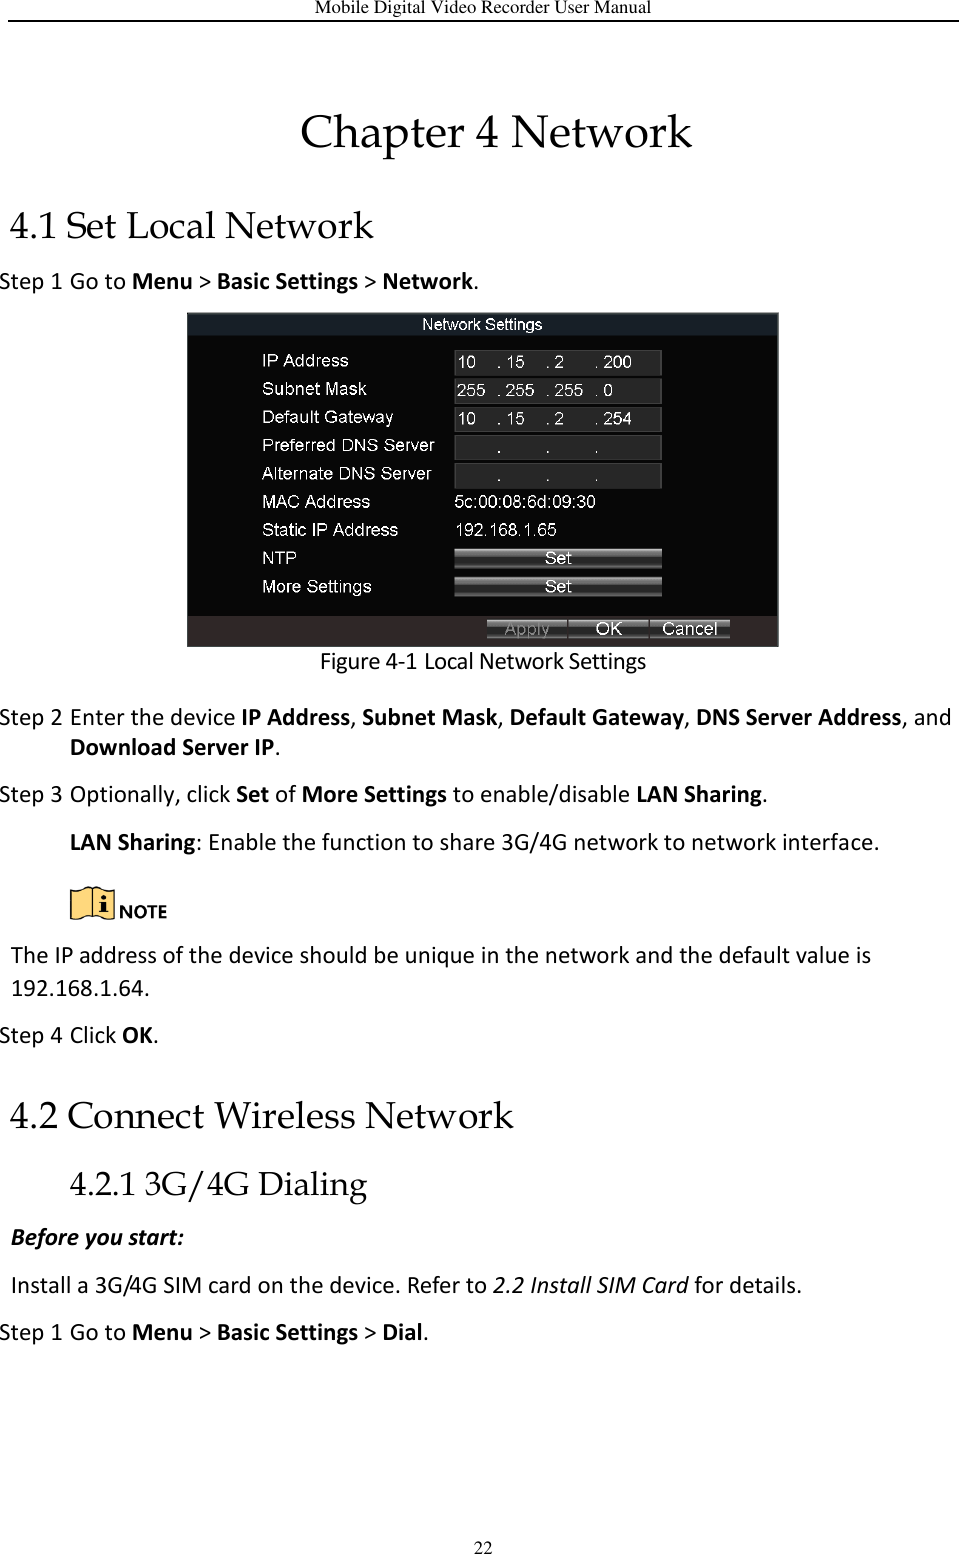 Mobile Digital Video Recorder User Manual 22 Chapter 4 Network 4.1 Set Local Network Step 1 Go to Menu &gt; Basic Settings &gt; Network.  Figure 4-1 Local Network Settings Step 2 Enter the device IP Address, Subnet Mask, Default Gateway, DNS Server Address, and Download Server IP. Step 3 Optionally, click Set of More Settings to enable/disable LAN Sharing. LAN Sharing: Enable the function to share 3G/4G network to network interface.   The IP address of the device should be unique in the network and the default value is 192.168.1.64. Step 4 Click OK. 4.2 Connect Wireless Network 4.2.1 3G/4G Dialing Before you start: Install a 3G/4G SIM card on the device. Refer to 2.2 Install SIM Card for details. Step 1 Go to Menu &gt; Basic Settings &gt; Dial. 